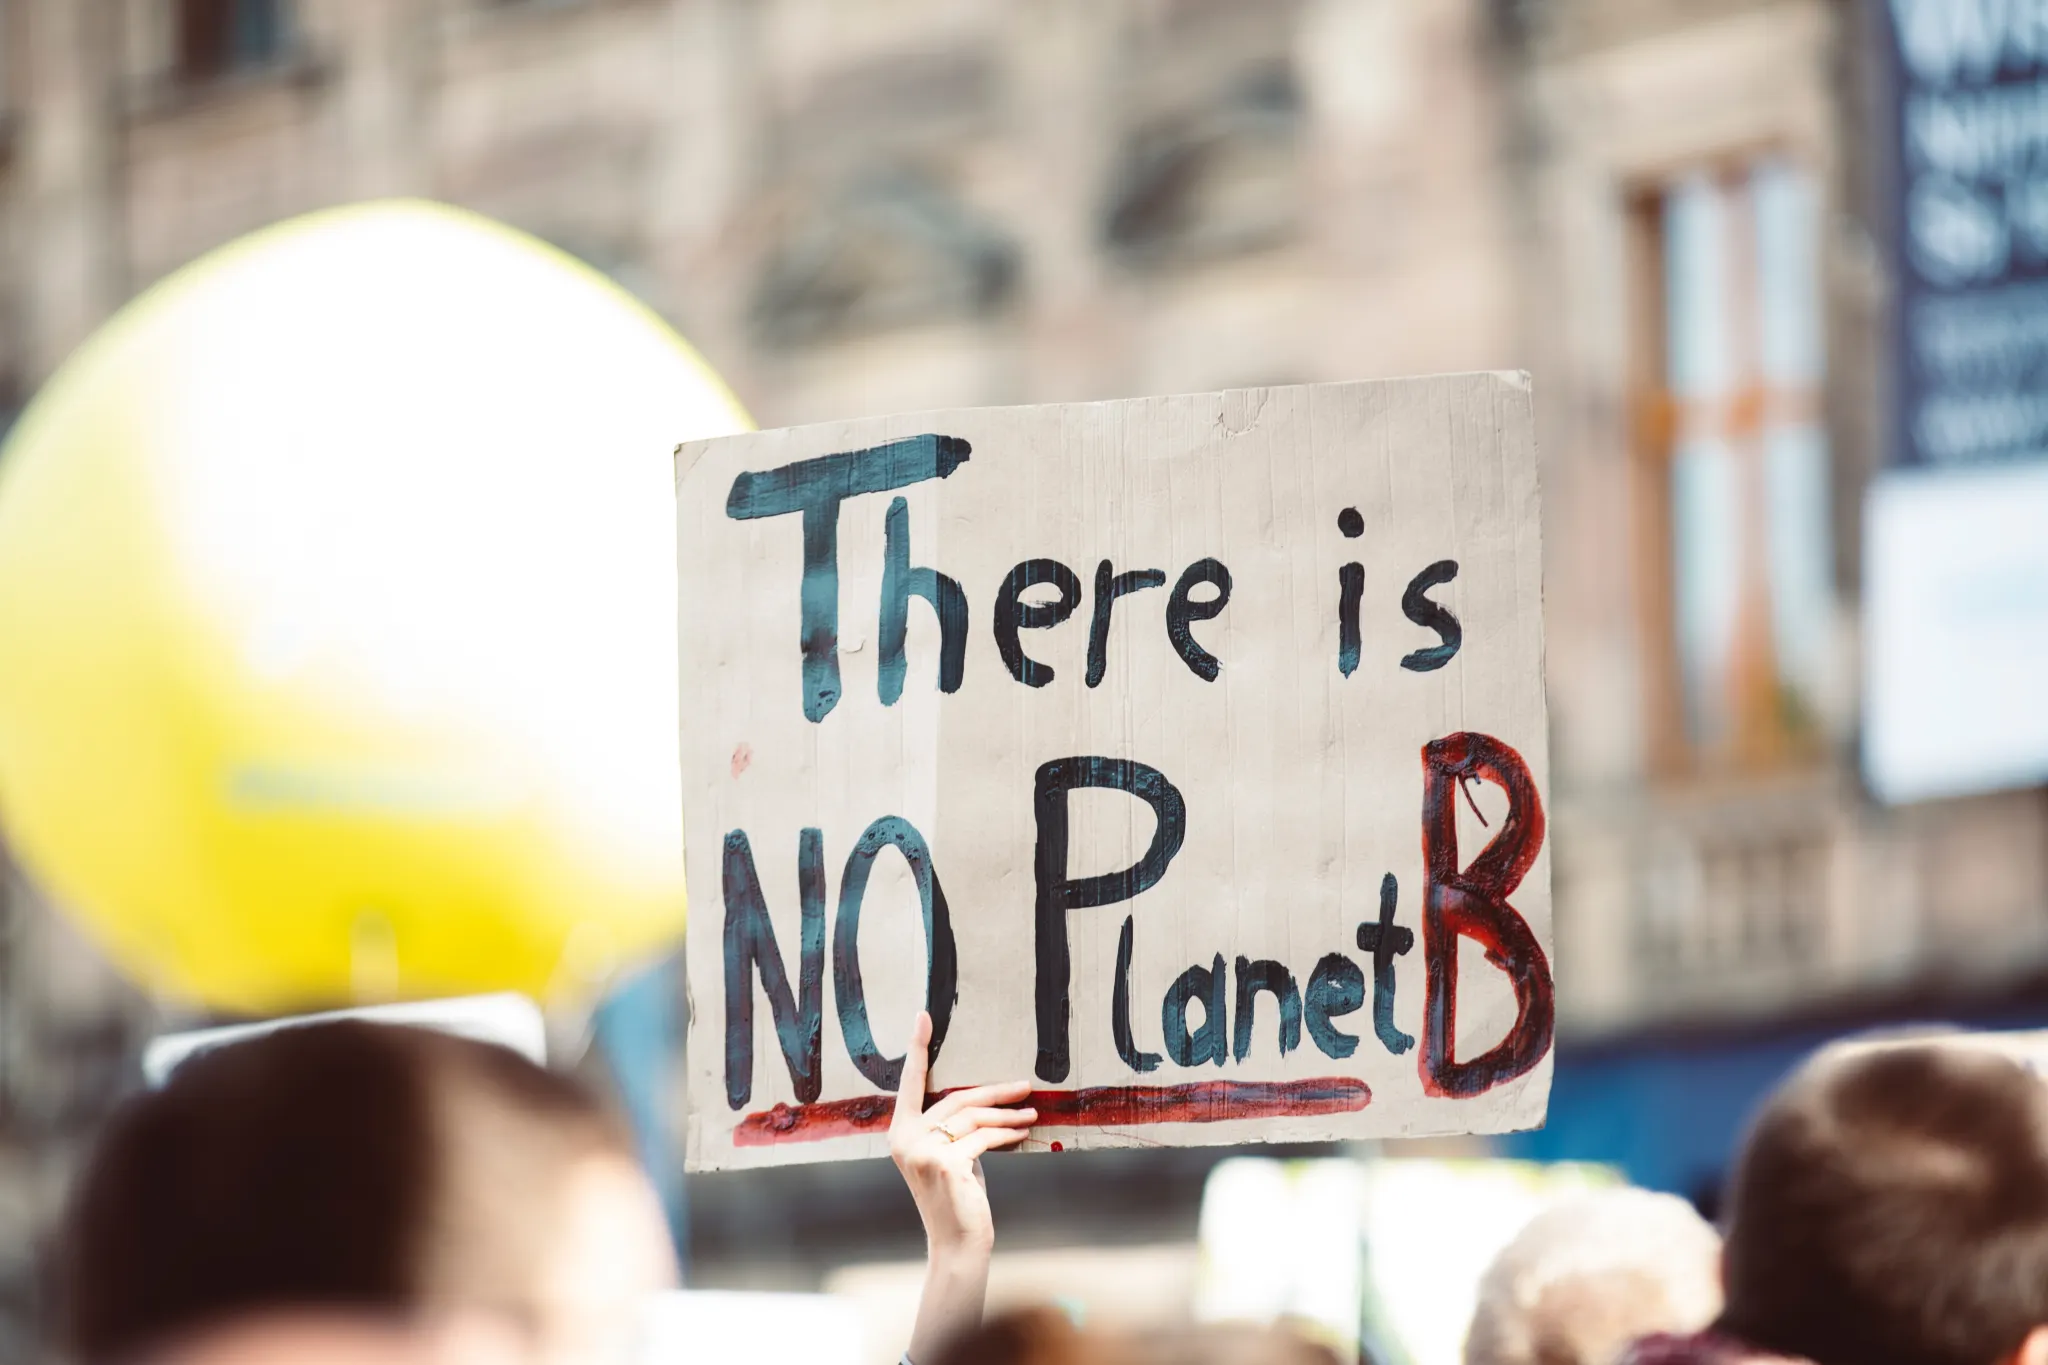 A placard held at a protest bearing the words 'There is no Planet B' emphasising the importance of listening to climate ambitions